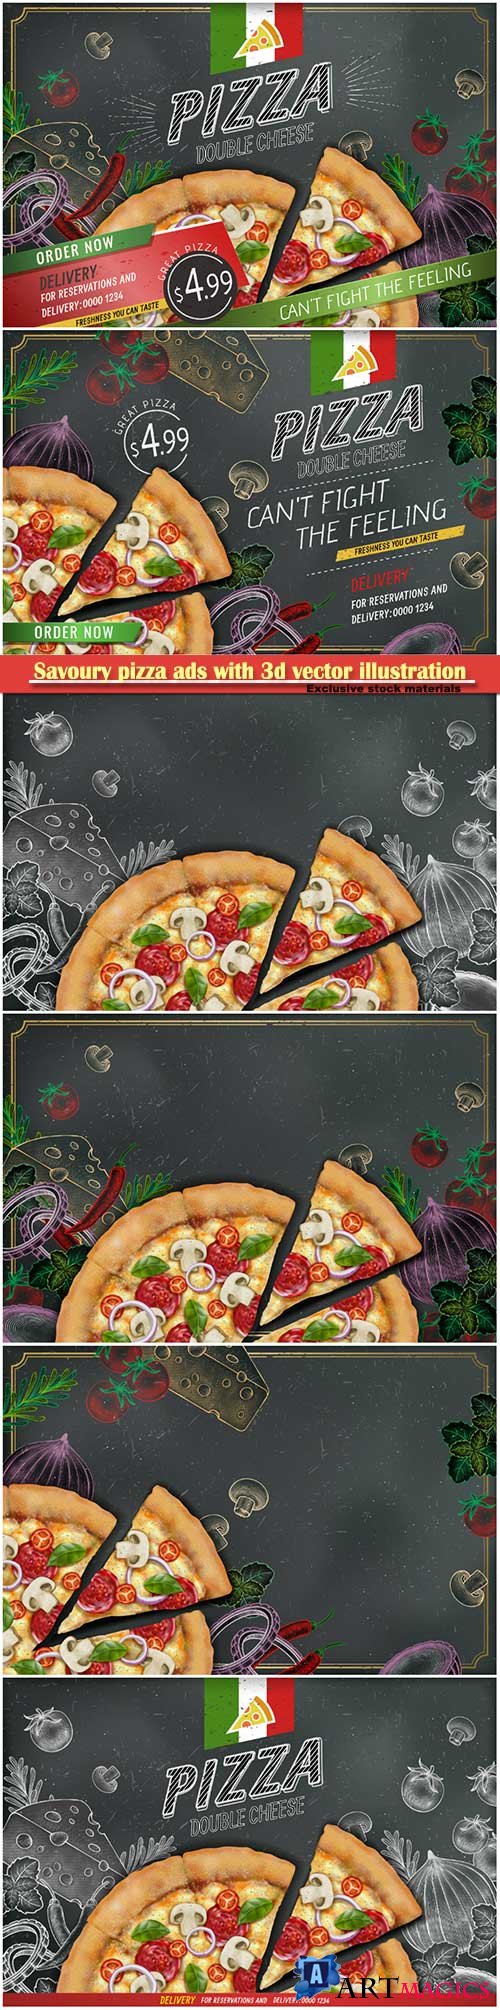 Savoury pizza ads with 3d vector illustration